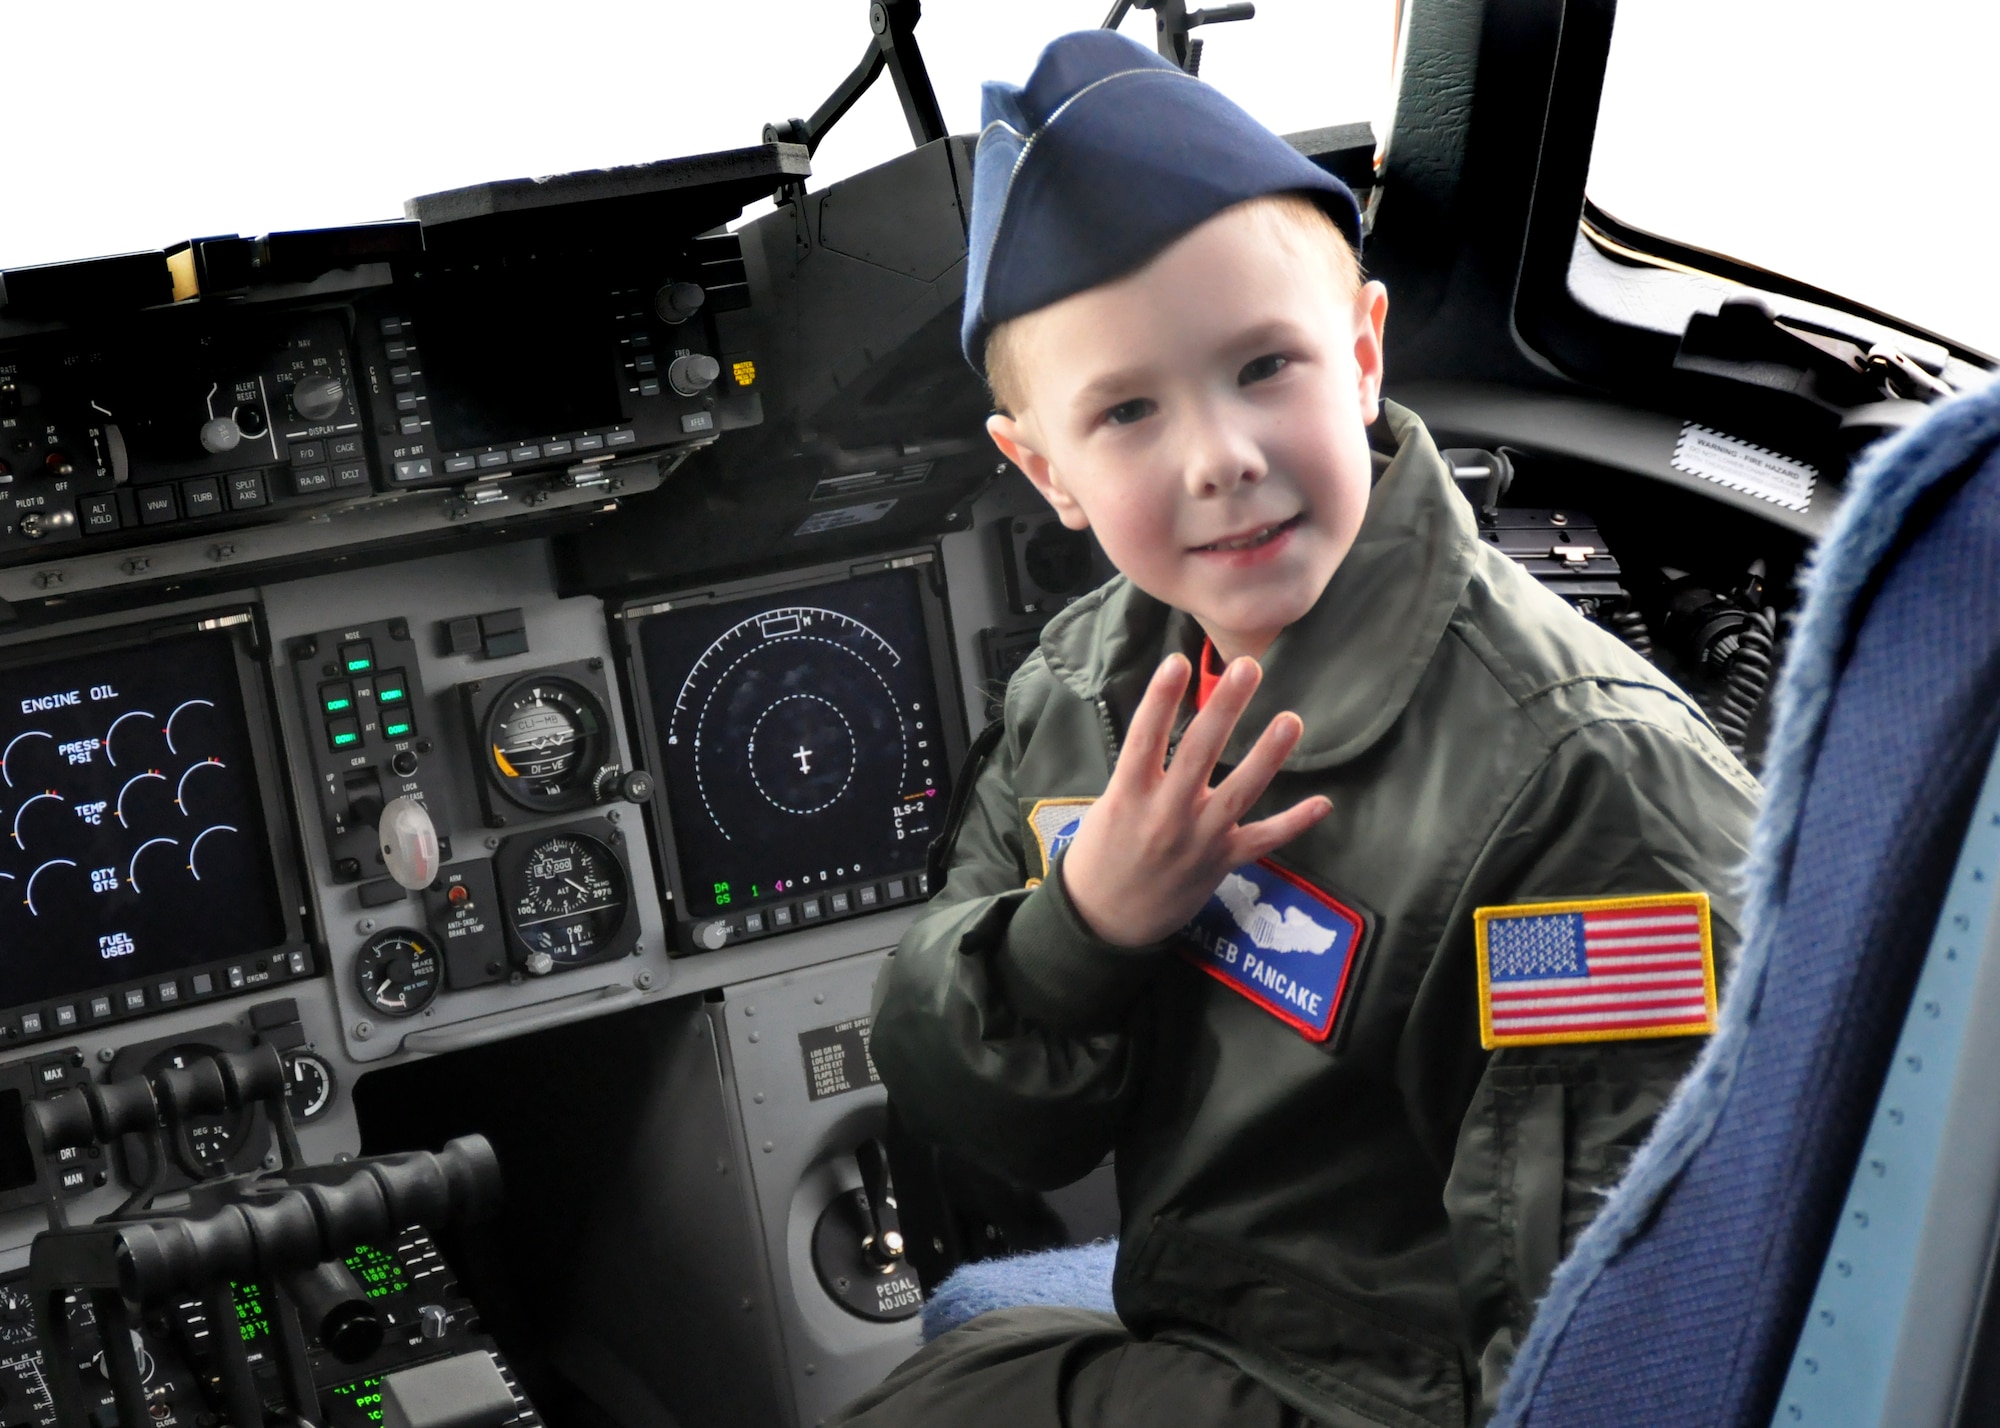 Caleb Pancake sits in the cockpit of a C-17 Globemaster III as part of the Pilot for a Day program March 16, 2012, at Joint Base Lewis-McChord, Wash. Pilot for a Day is an Air Force program that enables challenged youth a chance to visit a military installation, becoming part of the team in the process. (U.S. Air Force photo/Airman 1st Class Leah Young)